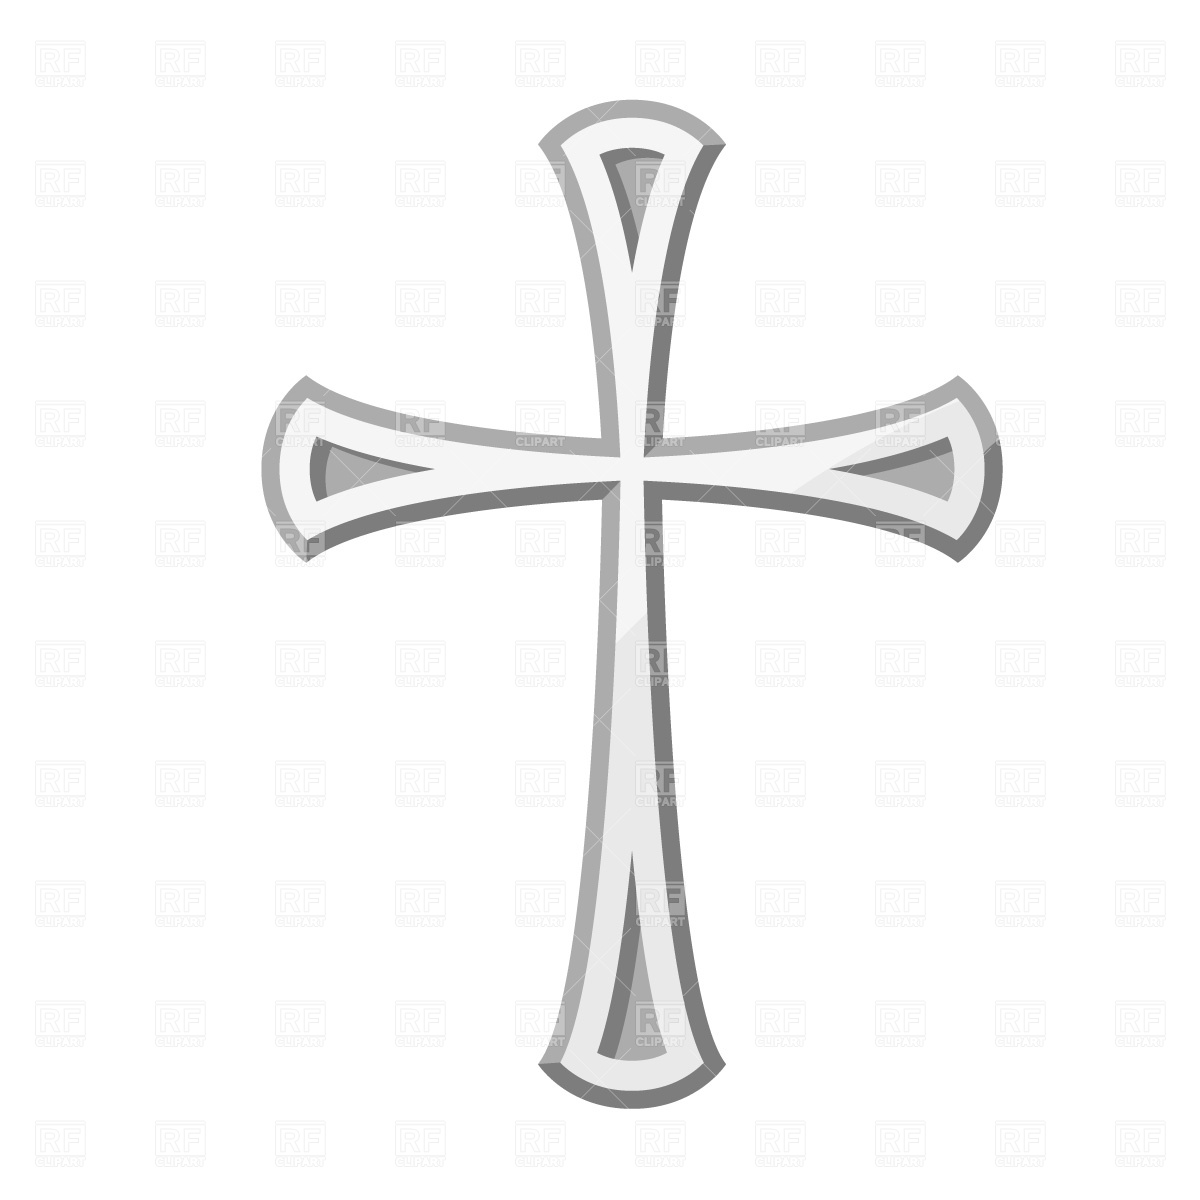 church clipart black and whit